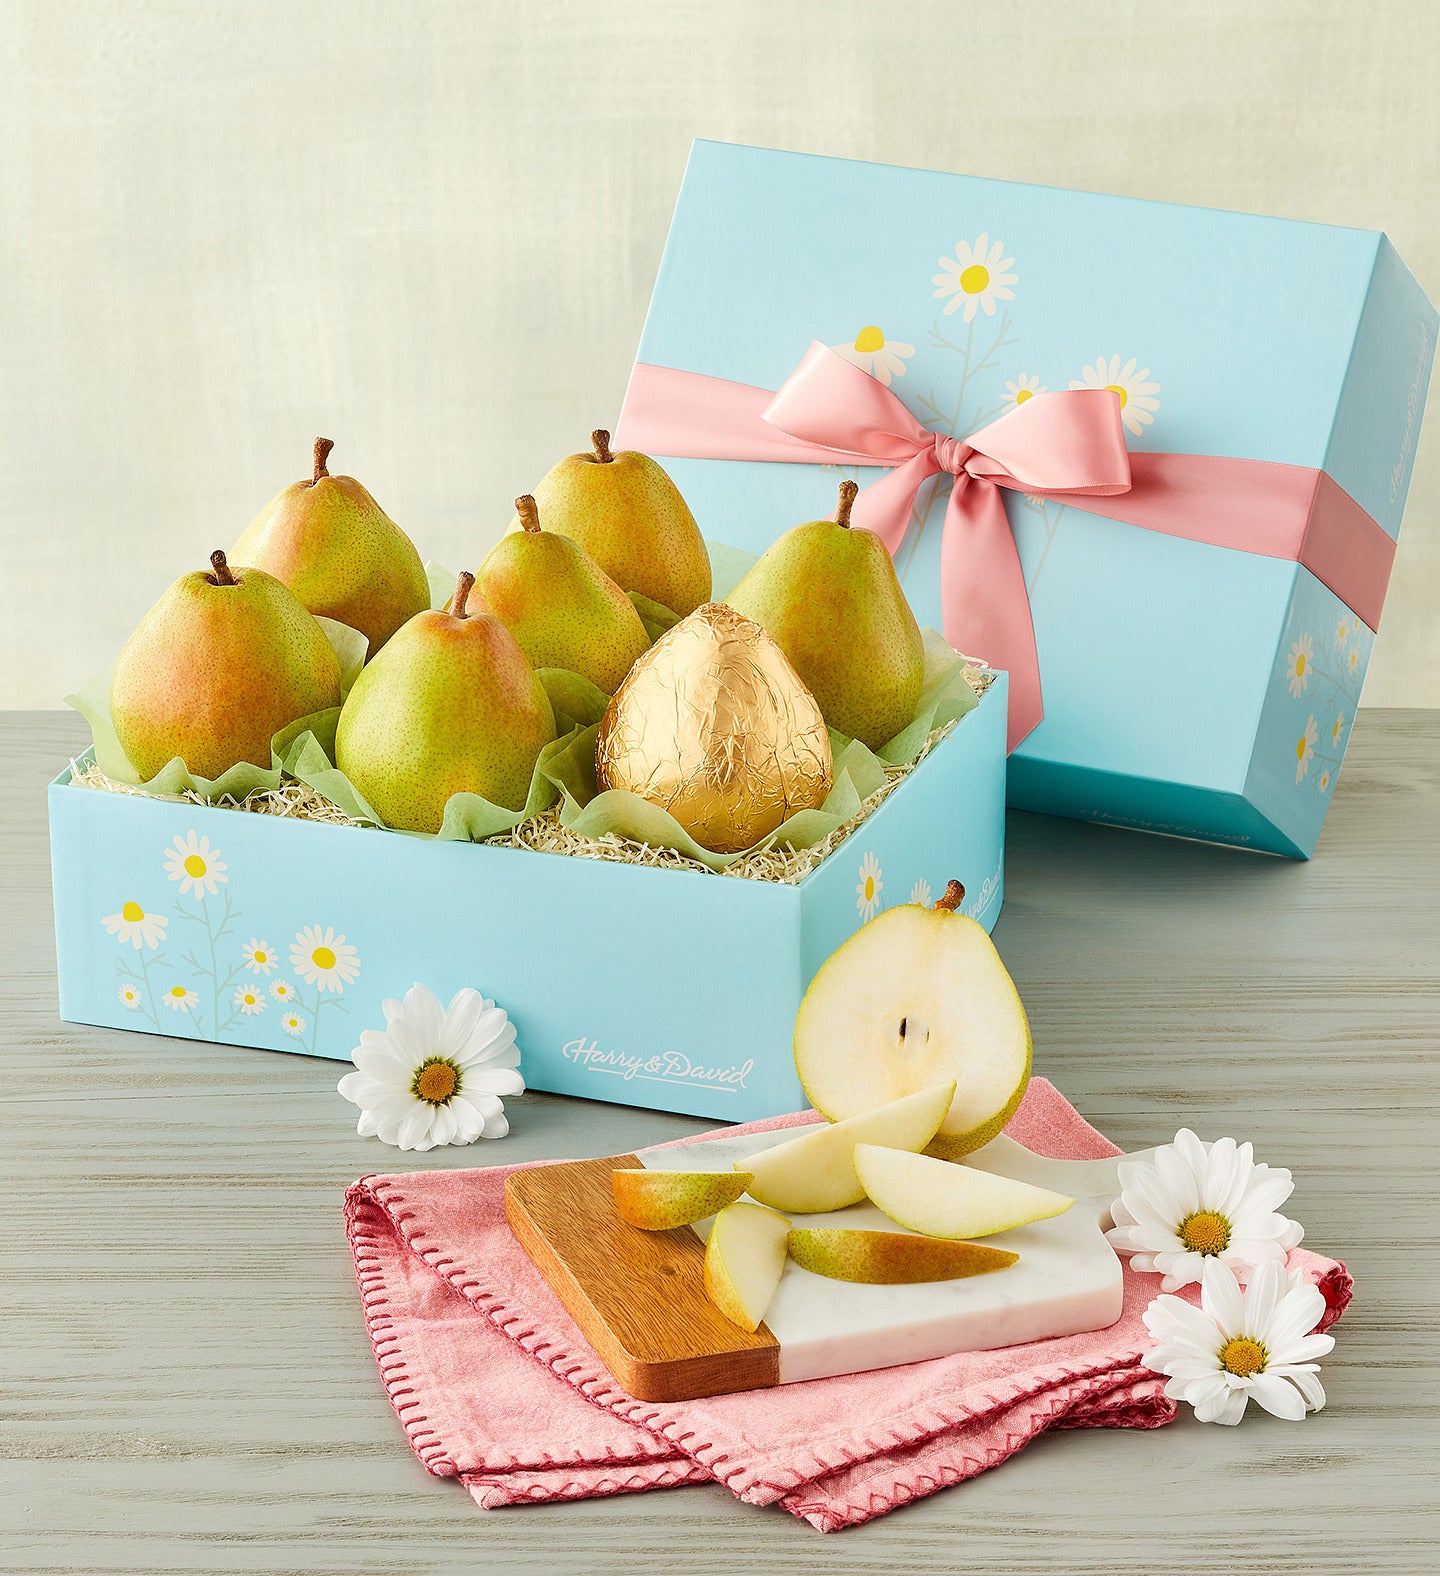 Royal Verano® Pears Mother's Day Gift Box